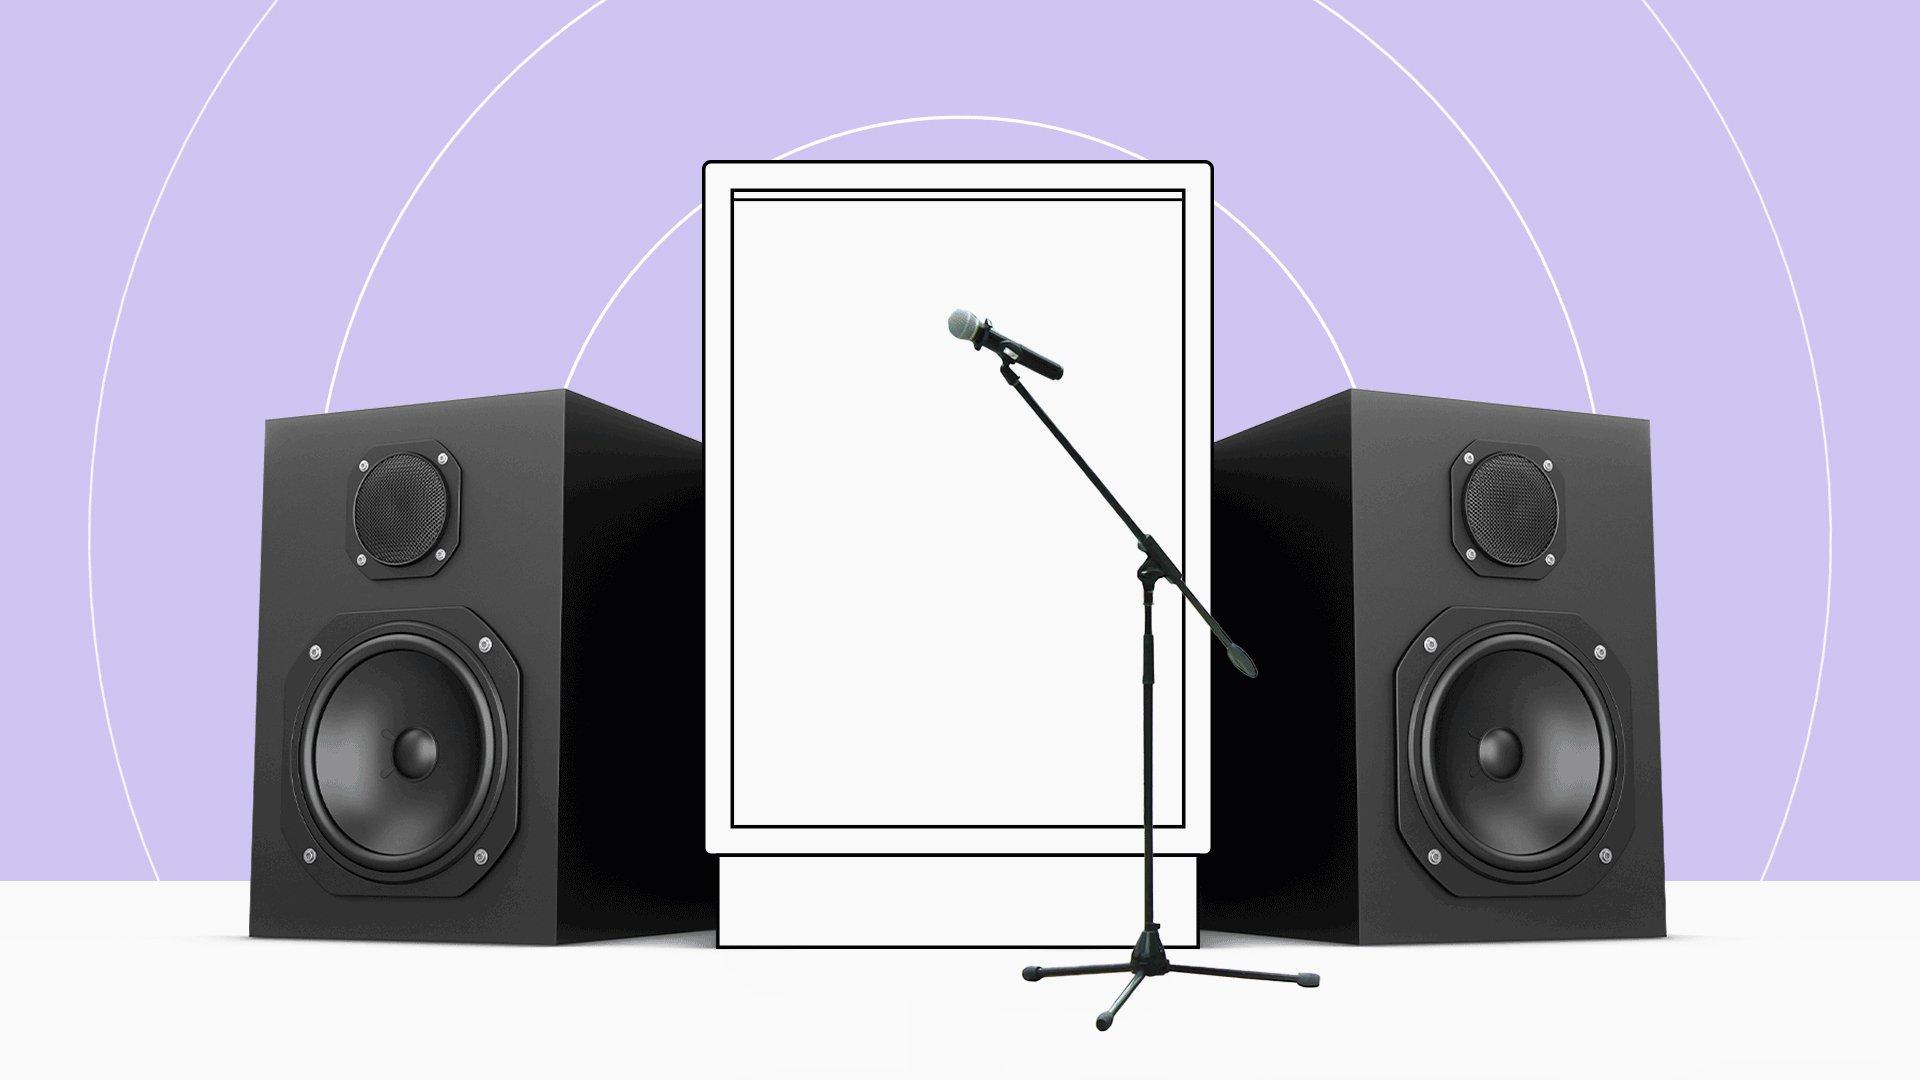 A tall digital screen with a microphone in front if it sits between two tall speaker boxes.